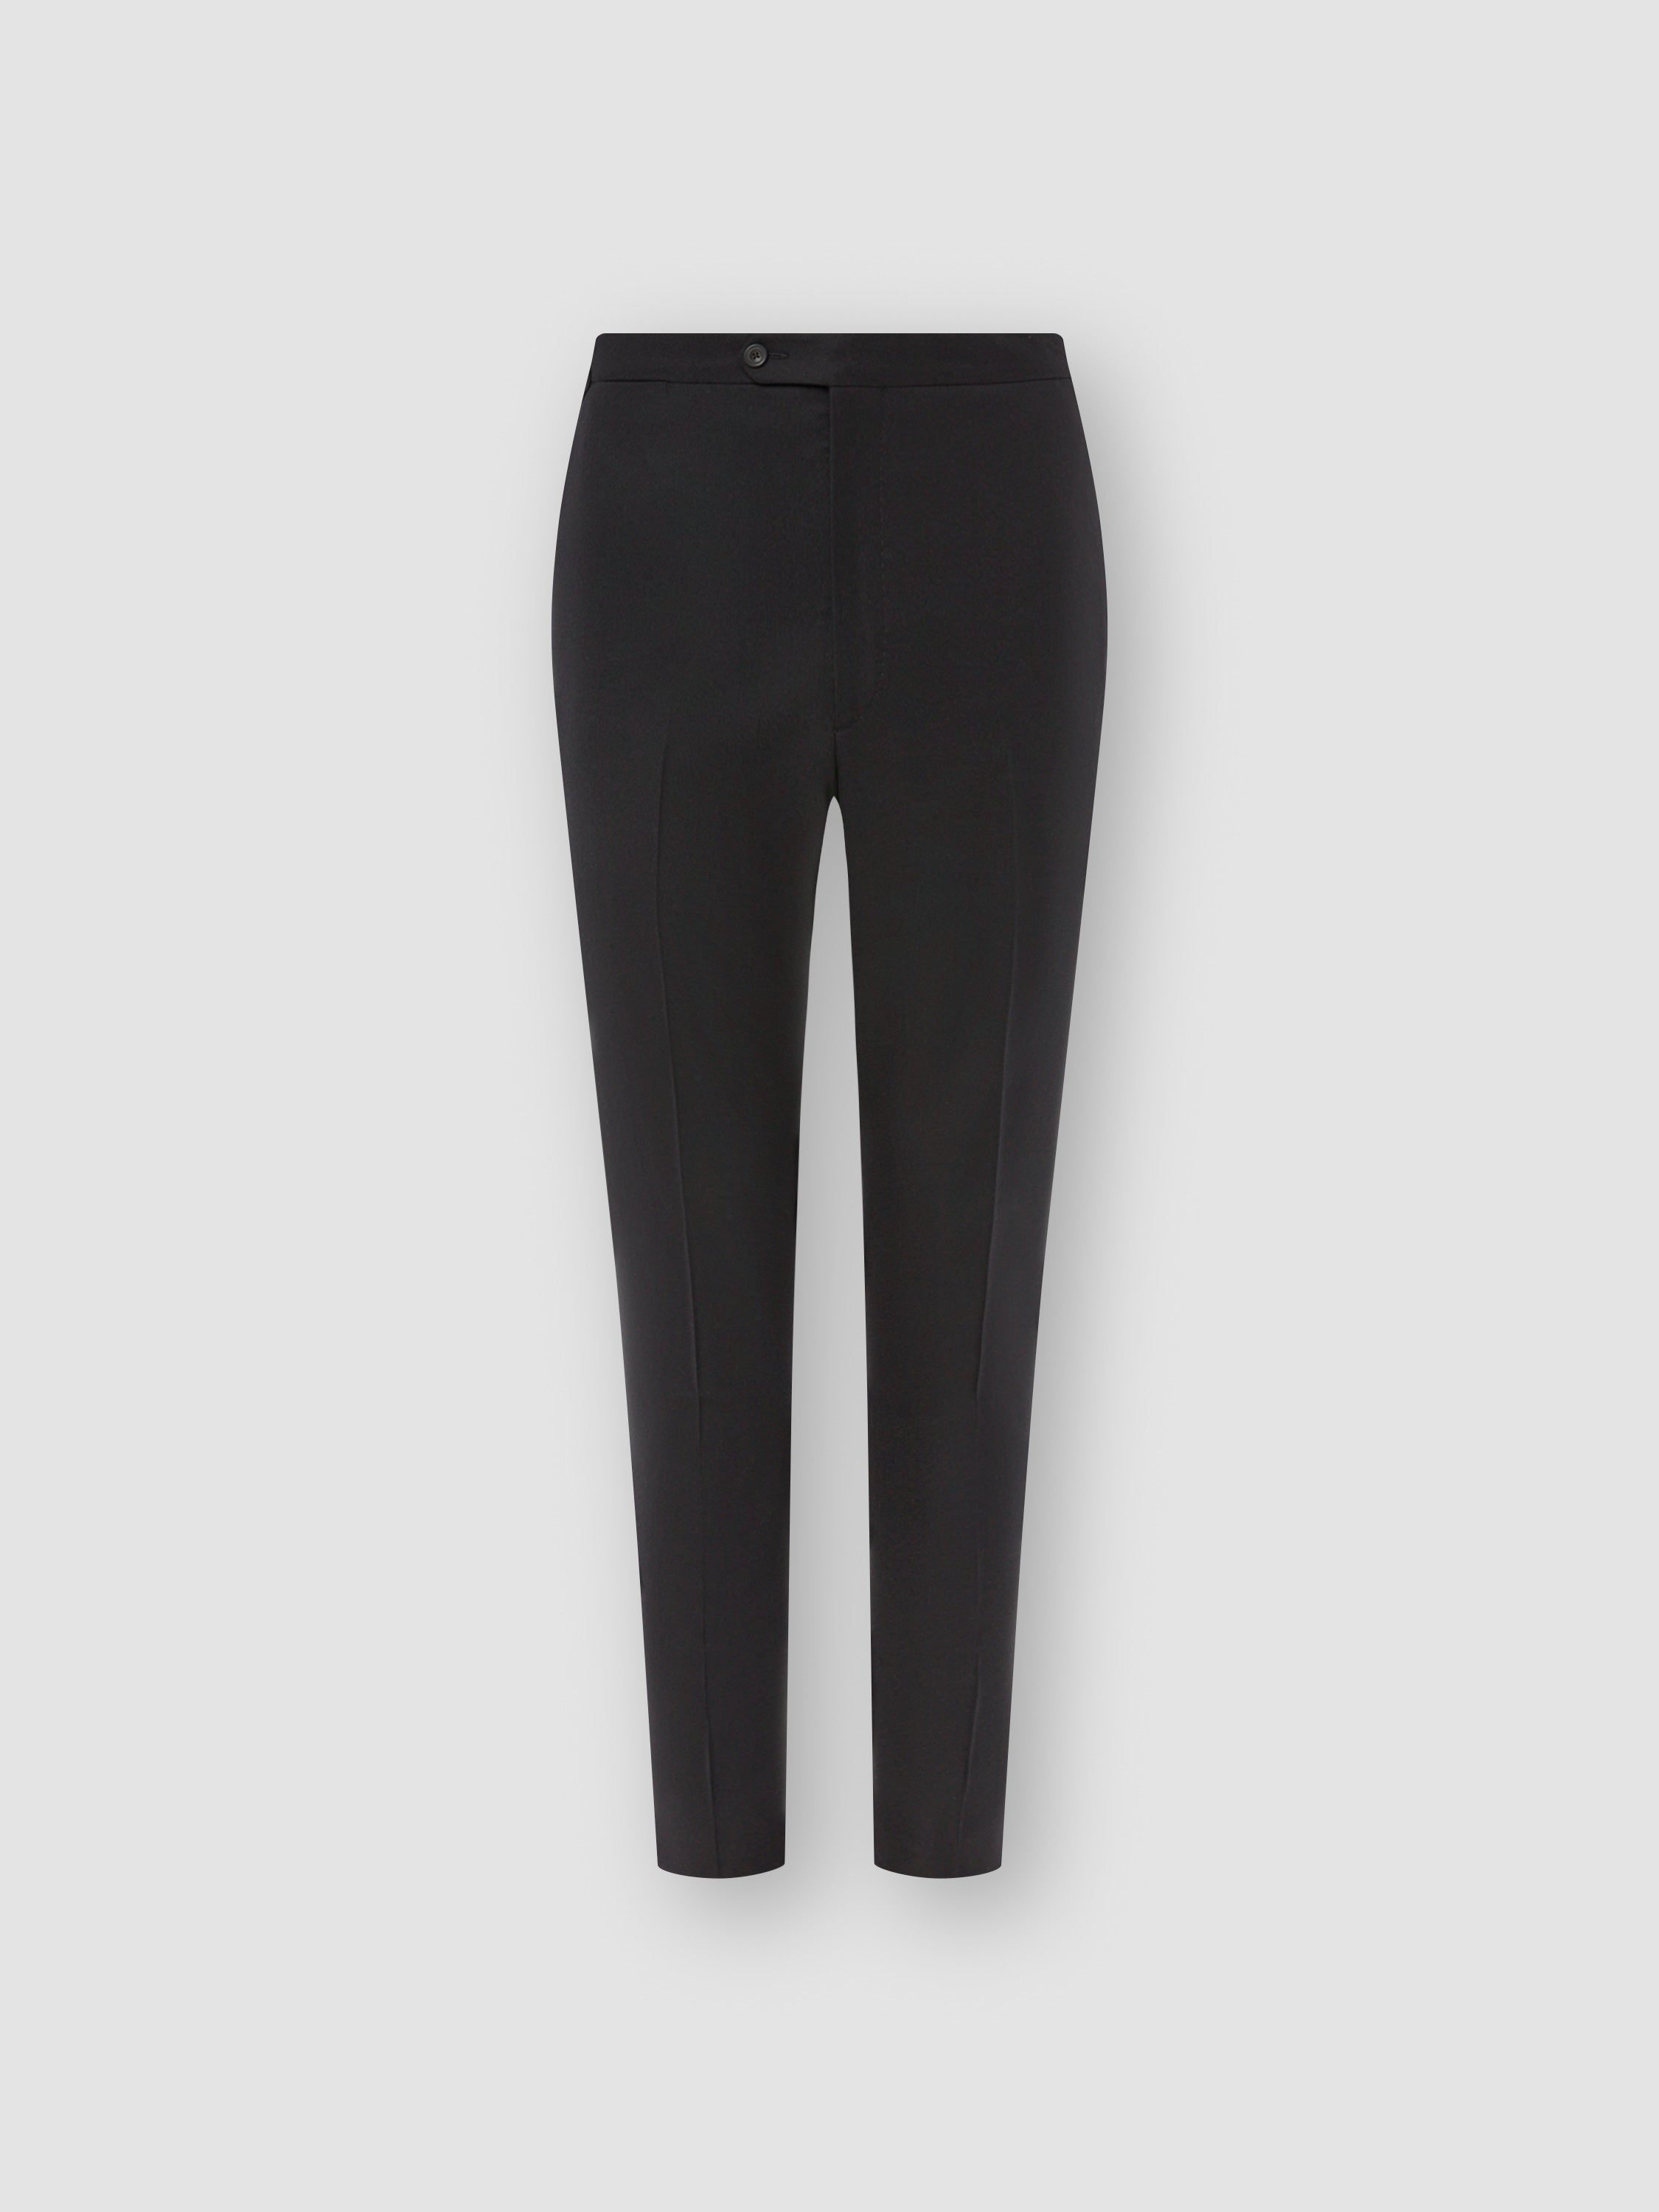 Flannel Flat Front Tailored Trousers Black Product Image